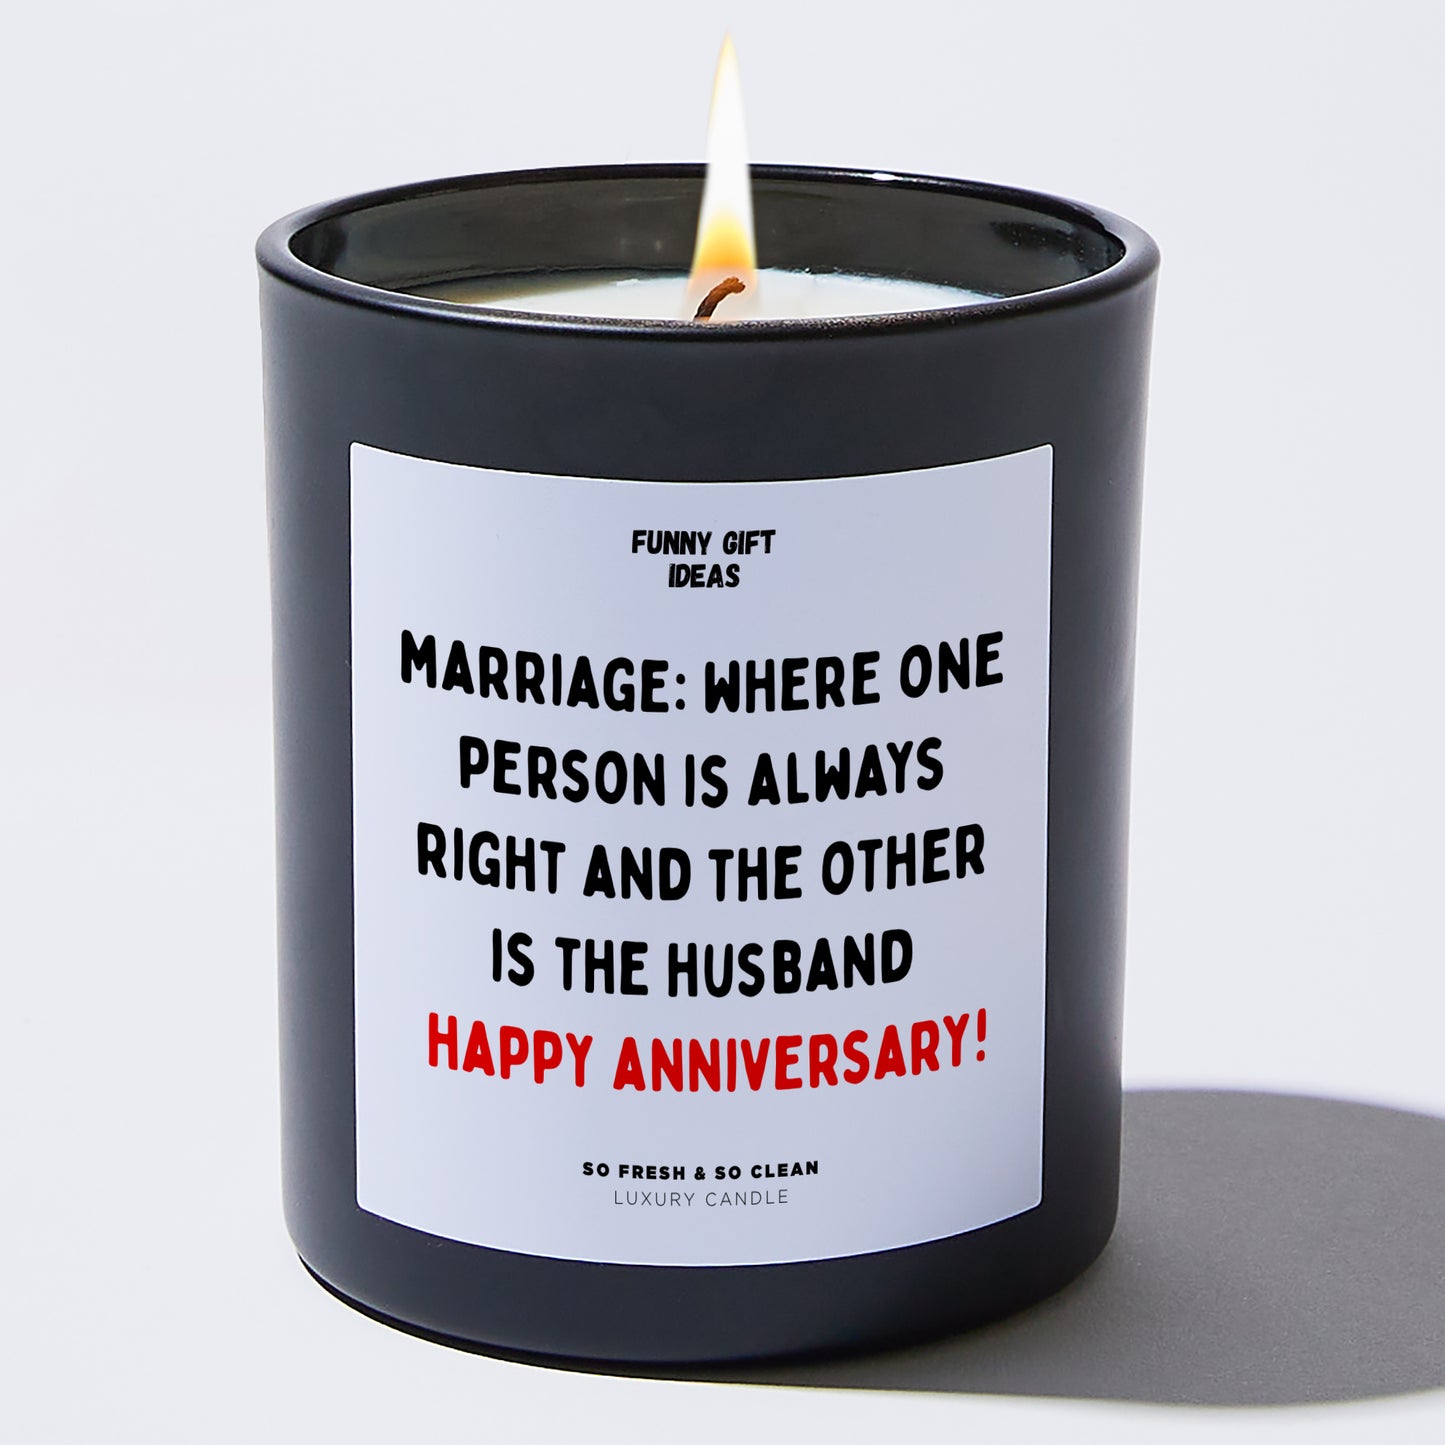 Anniversary Present - Marriage: Where One Person is Always Right, and the Other is the Husband. Happy Anniversary! - Candle